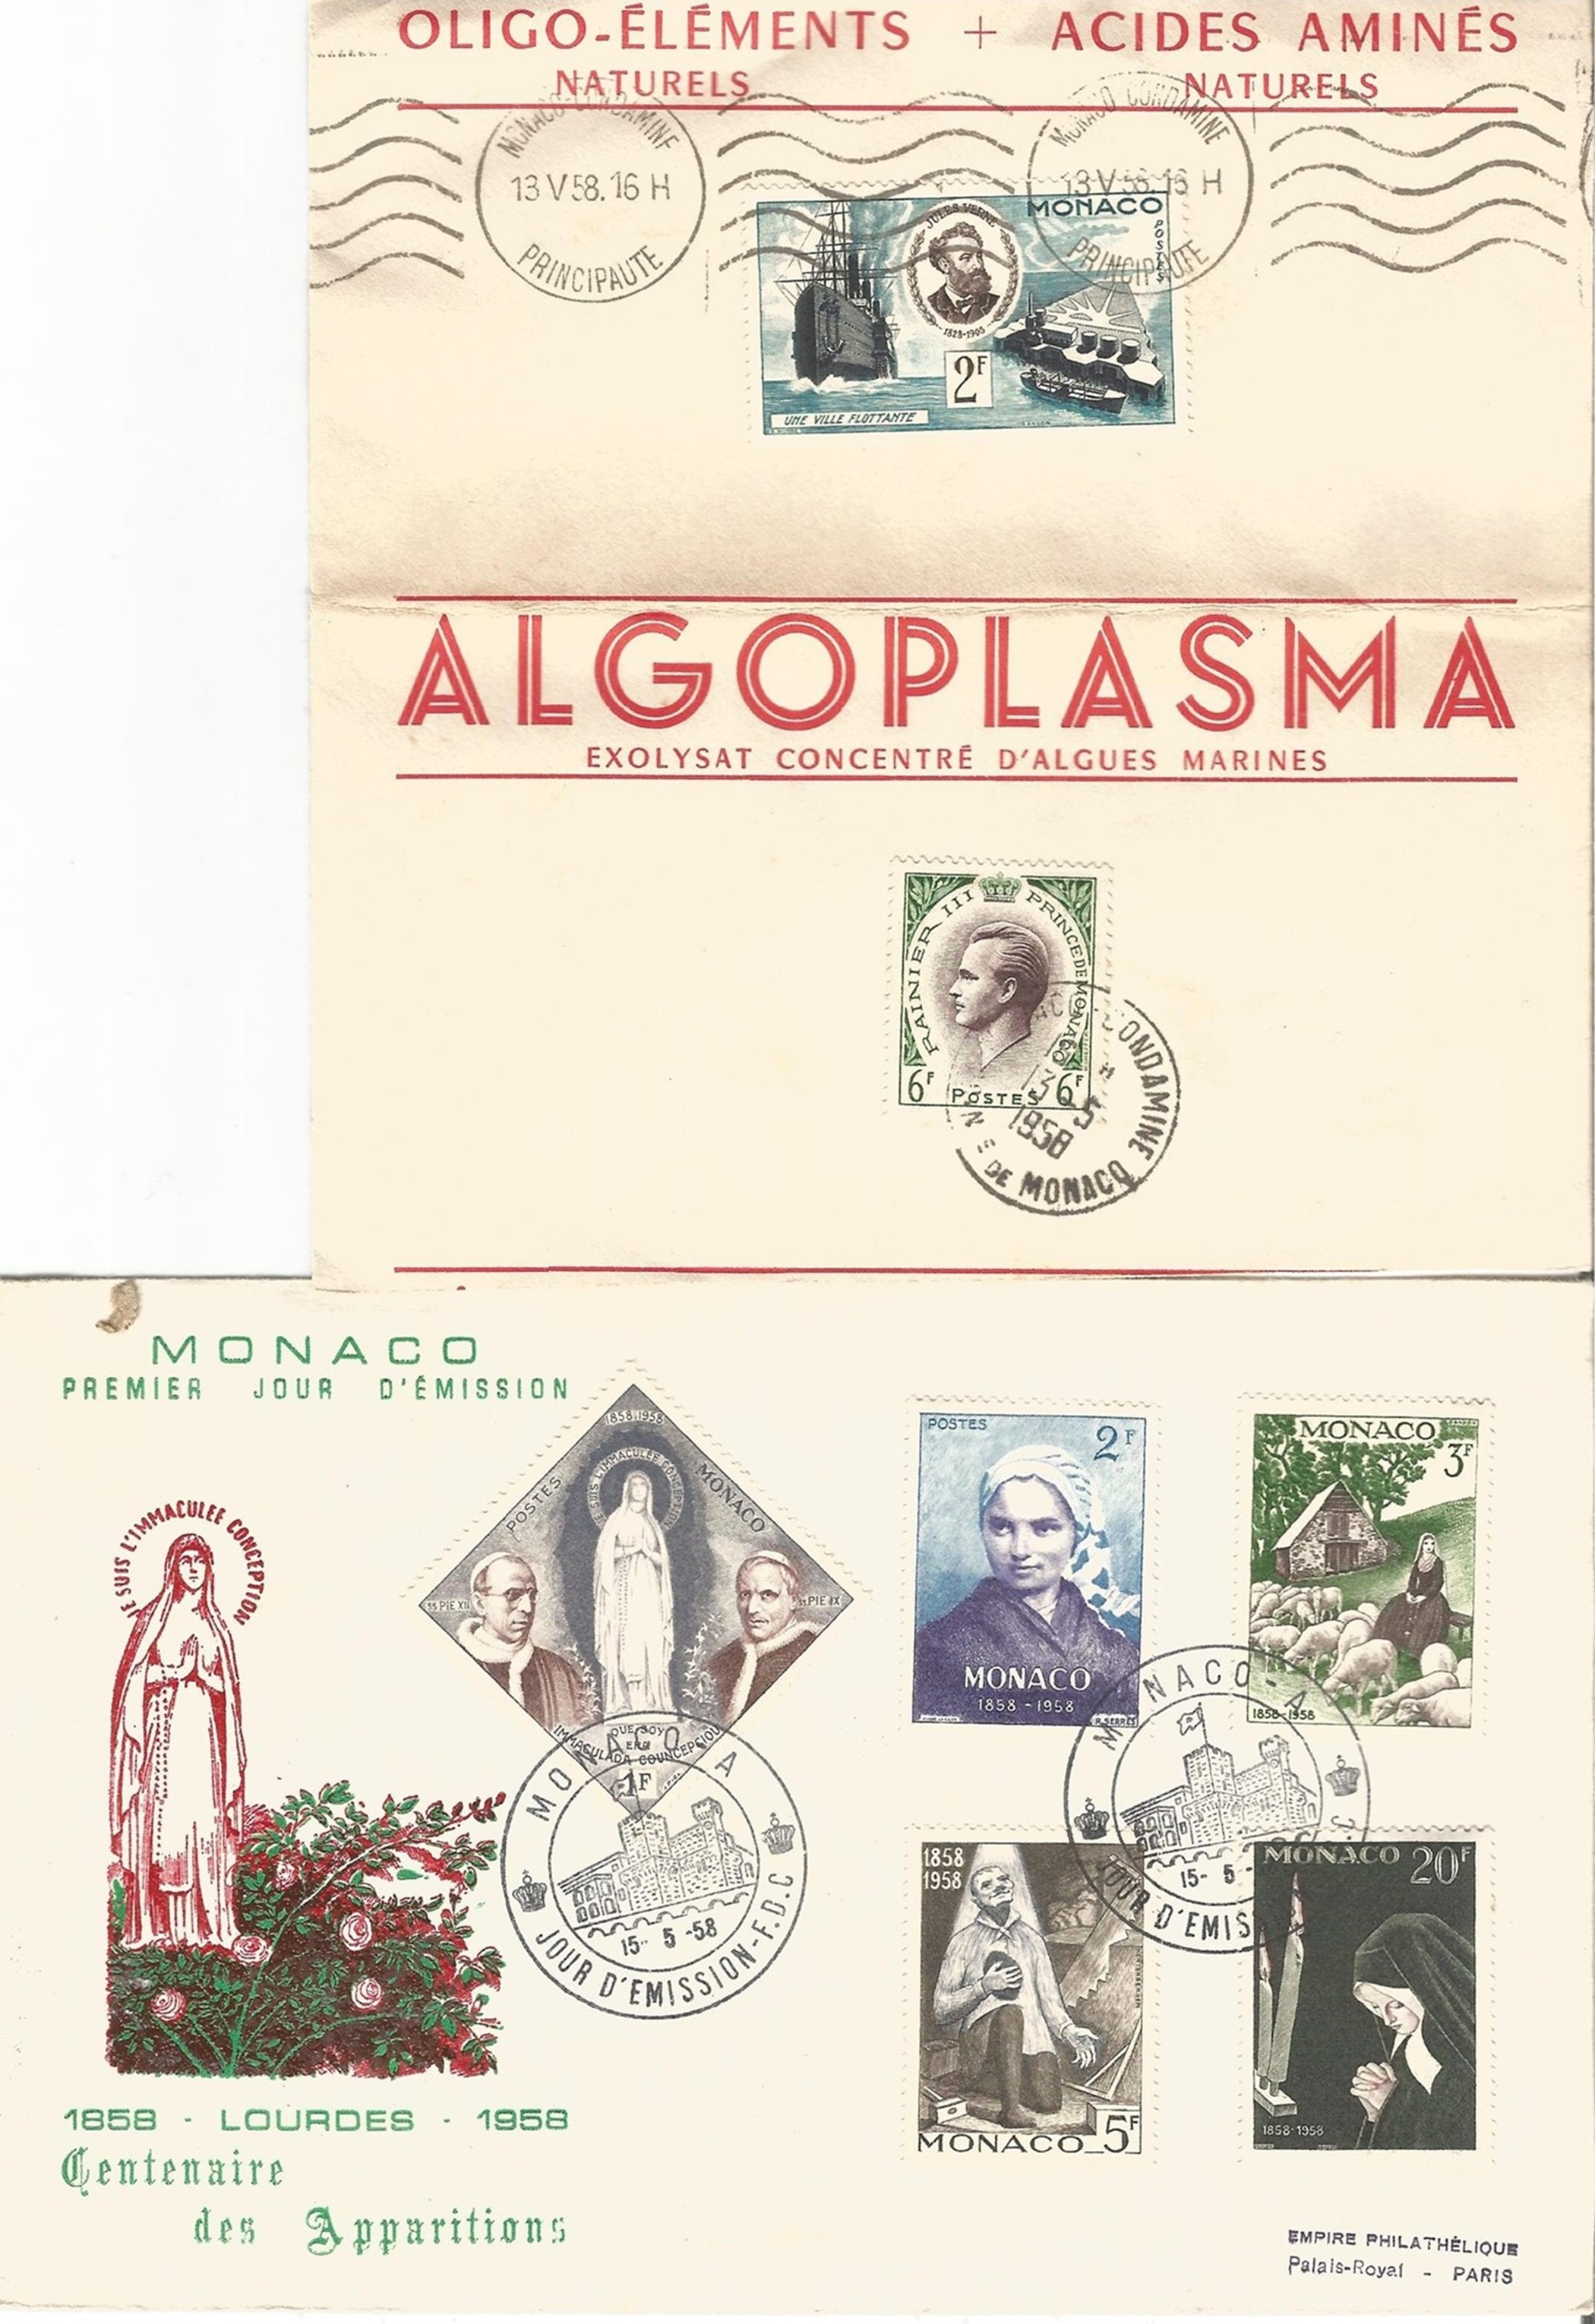 A Selection of FDC and Commemorative Covers from Switzerland & Monaco, 8 Items. Good condition. We